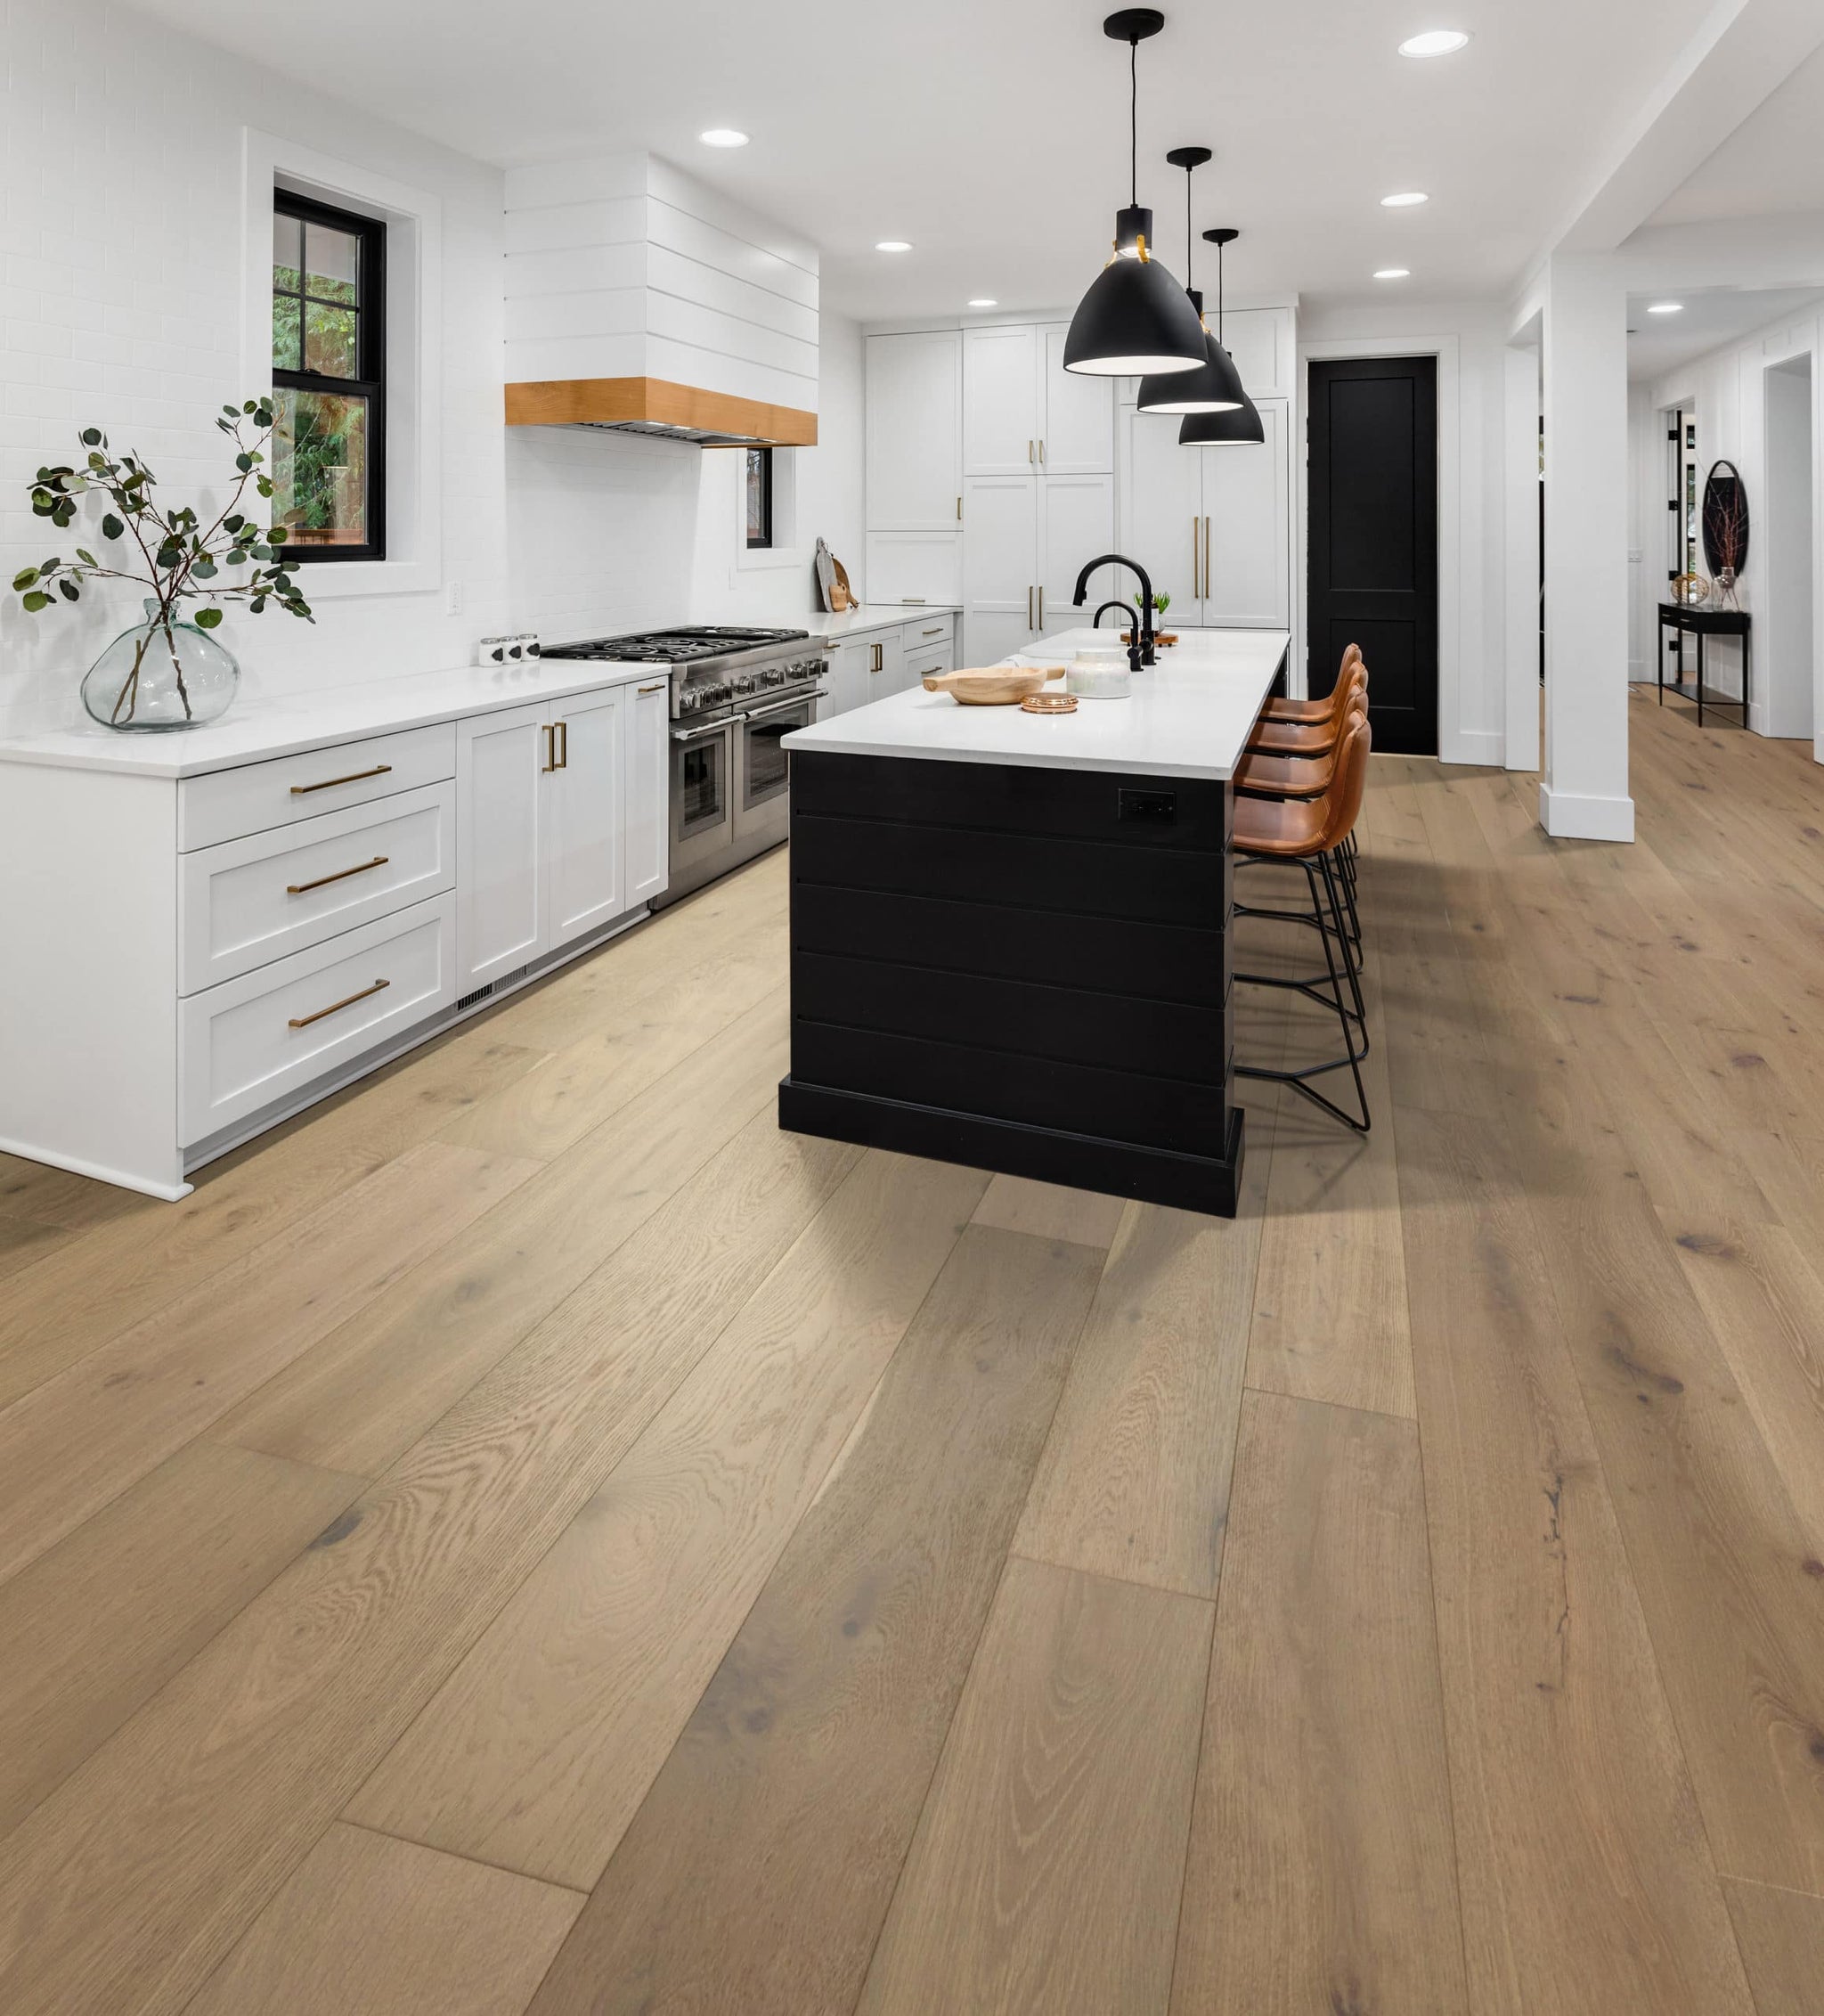 Pros and Cons of Hardwood Flooring in Your Kitchen